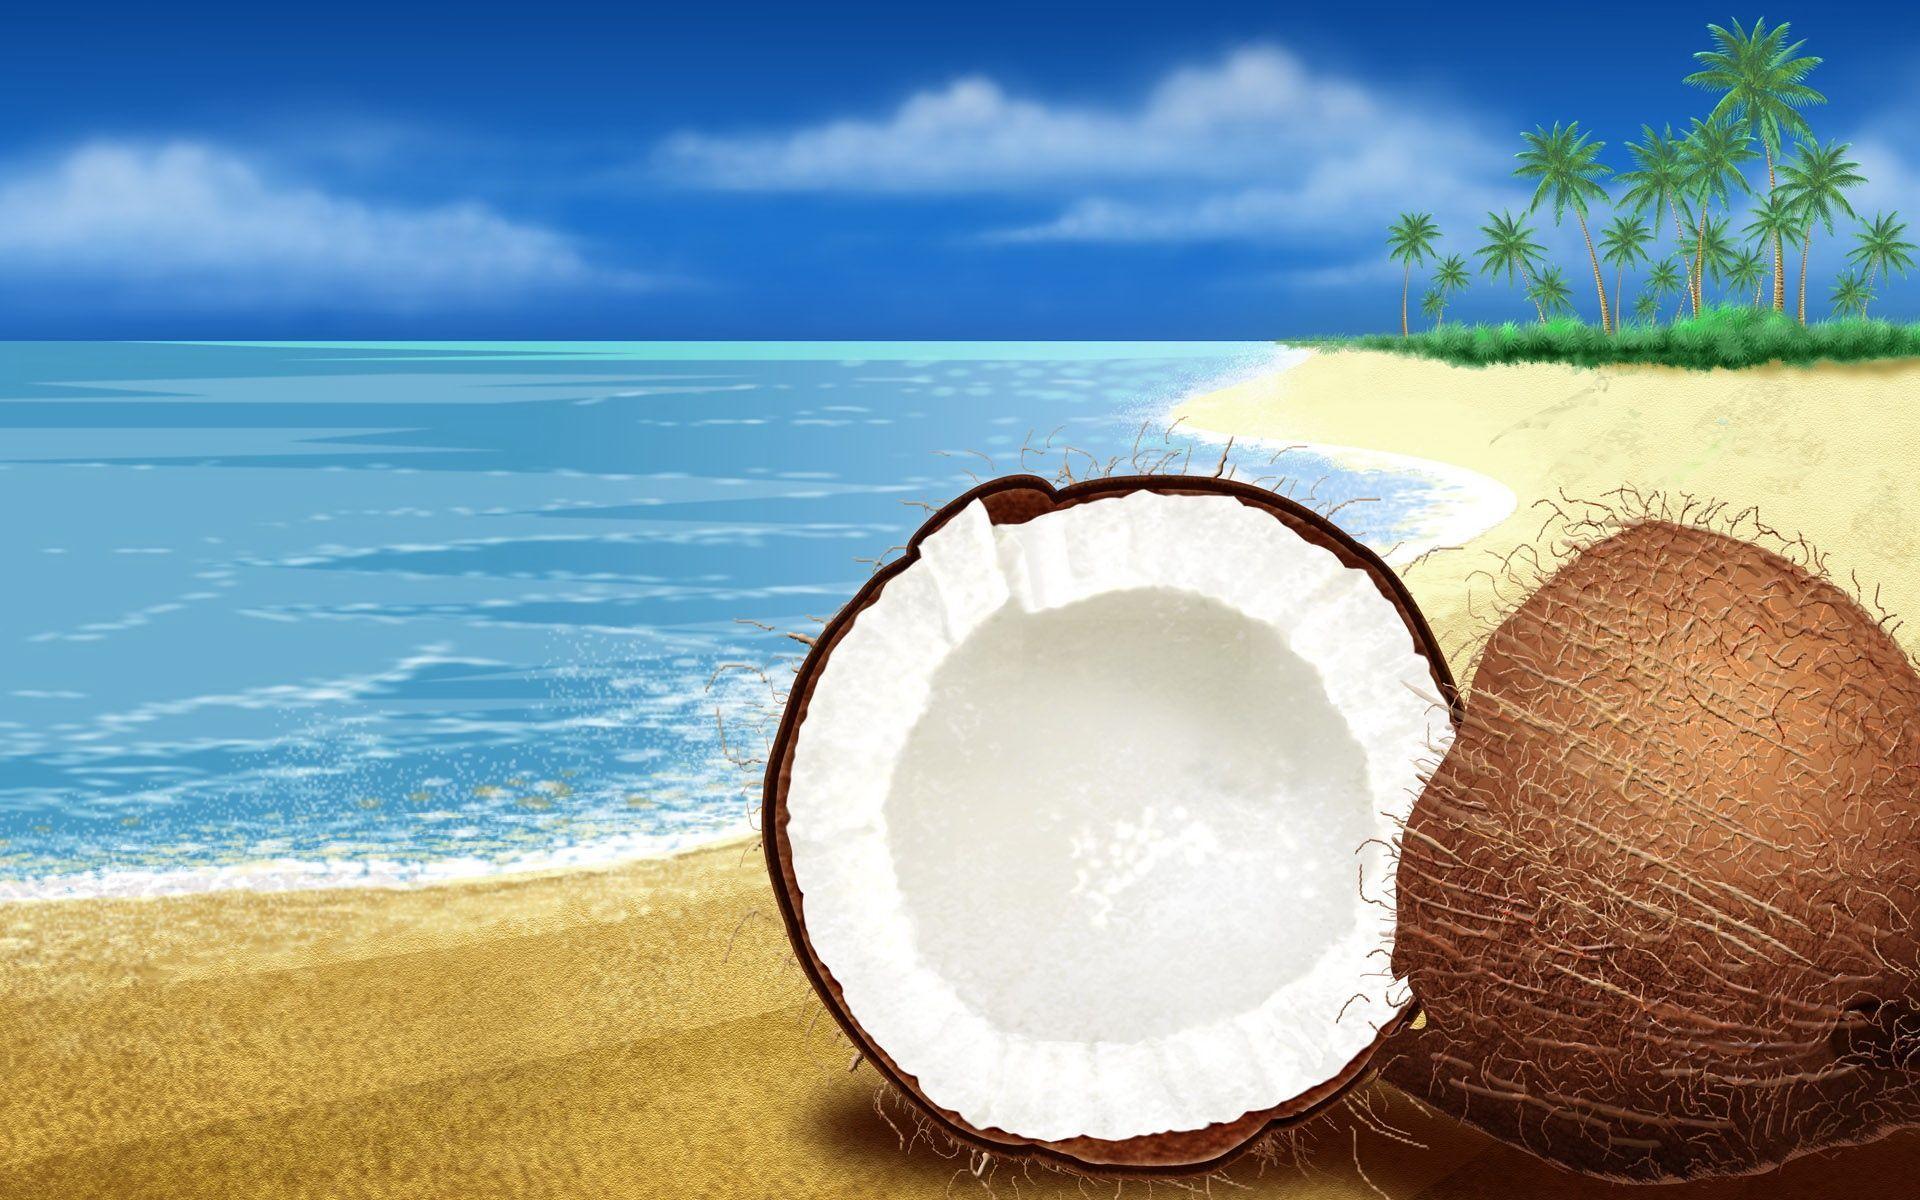 Coconut Tree Animated HD Wallpaper, Background Image